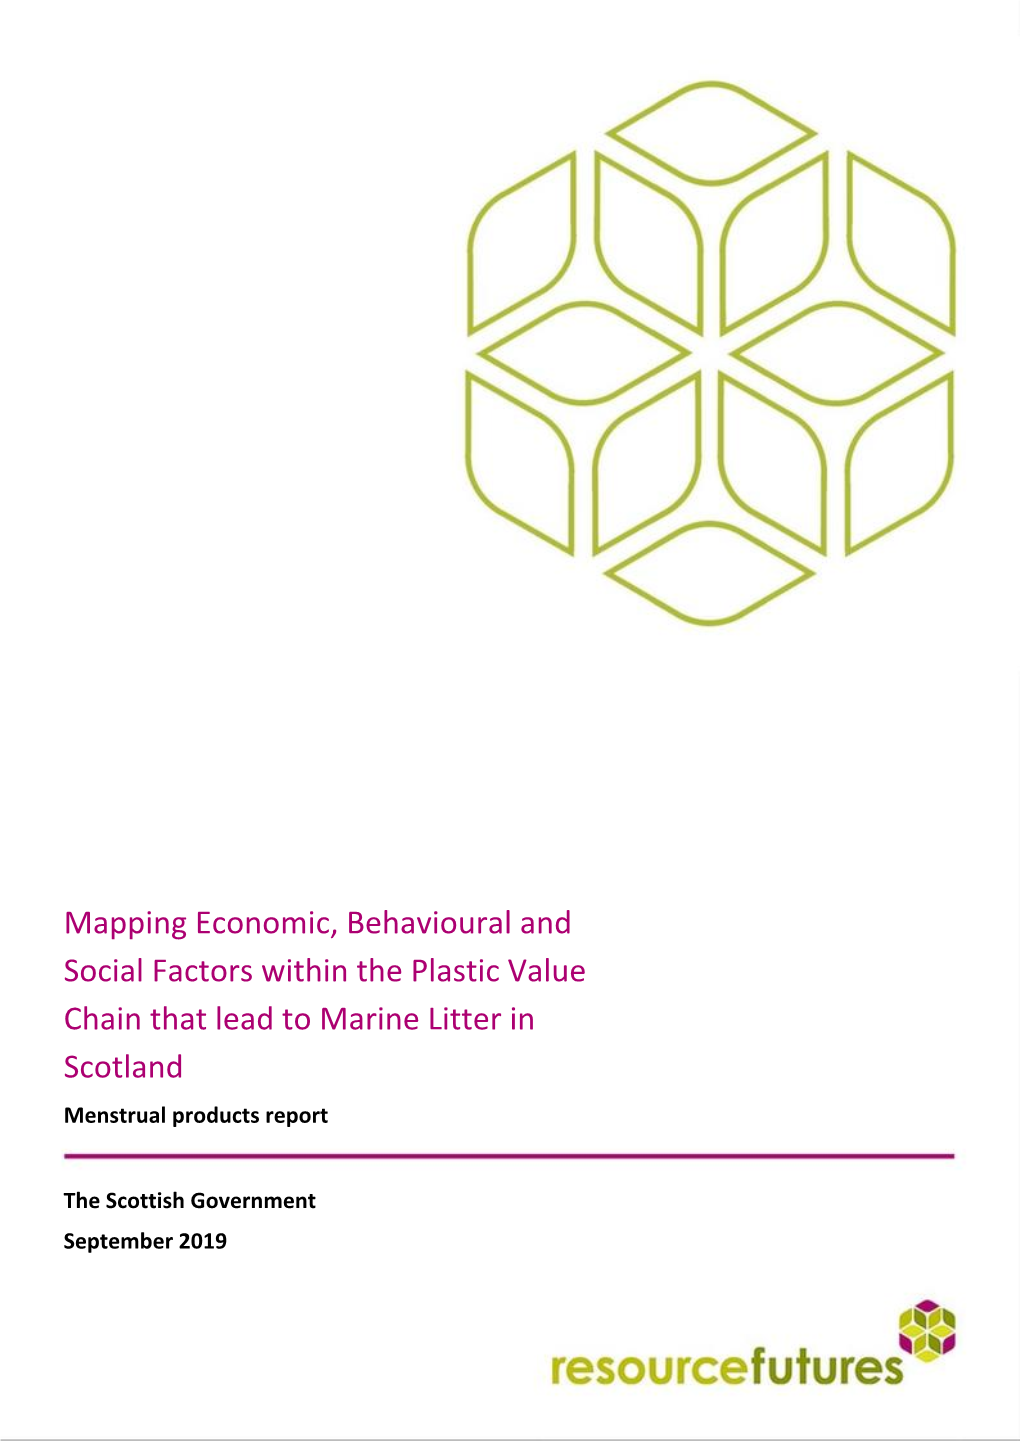 Mapping Economic, Behavioural and Social Factors Within the Plastic Value Chain That Lead to Marine Litter in Scotland Menstrual Products Report